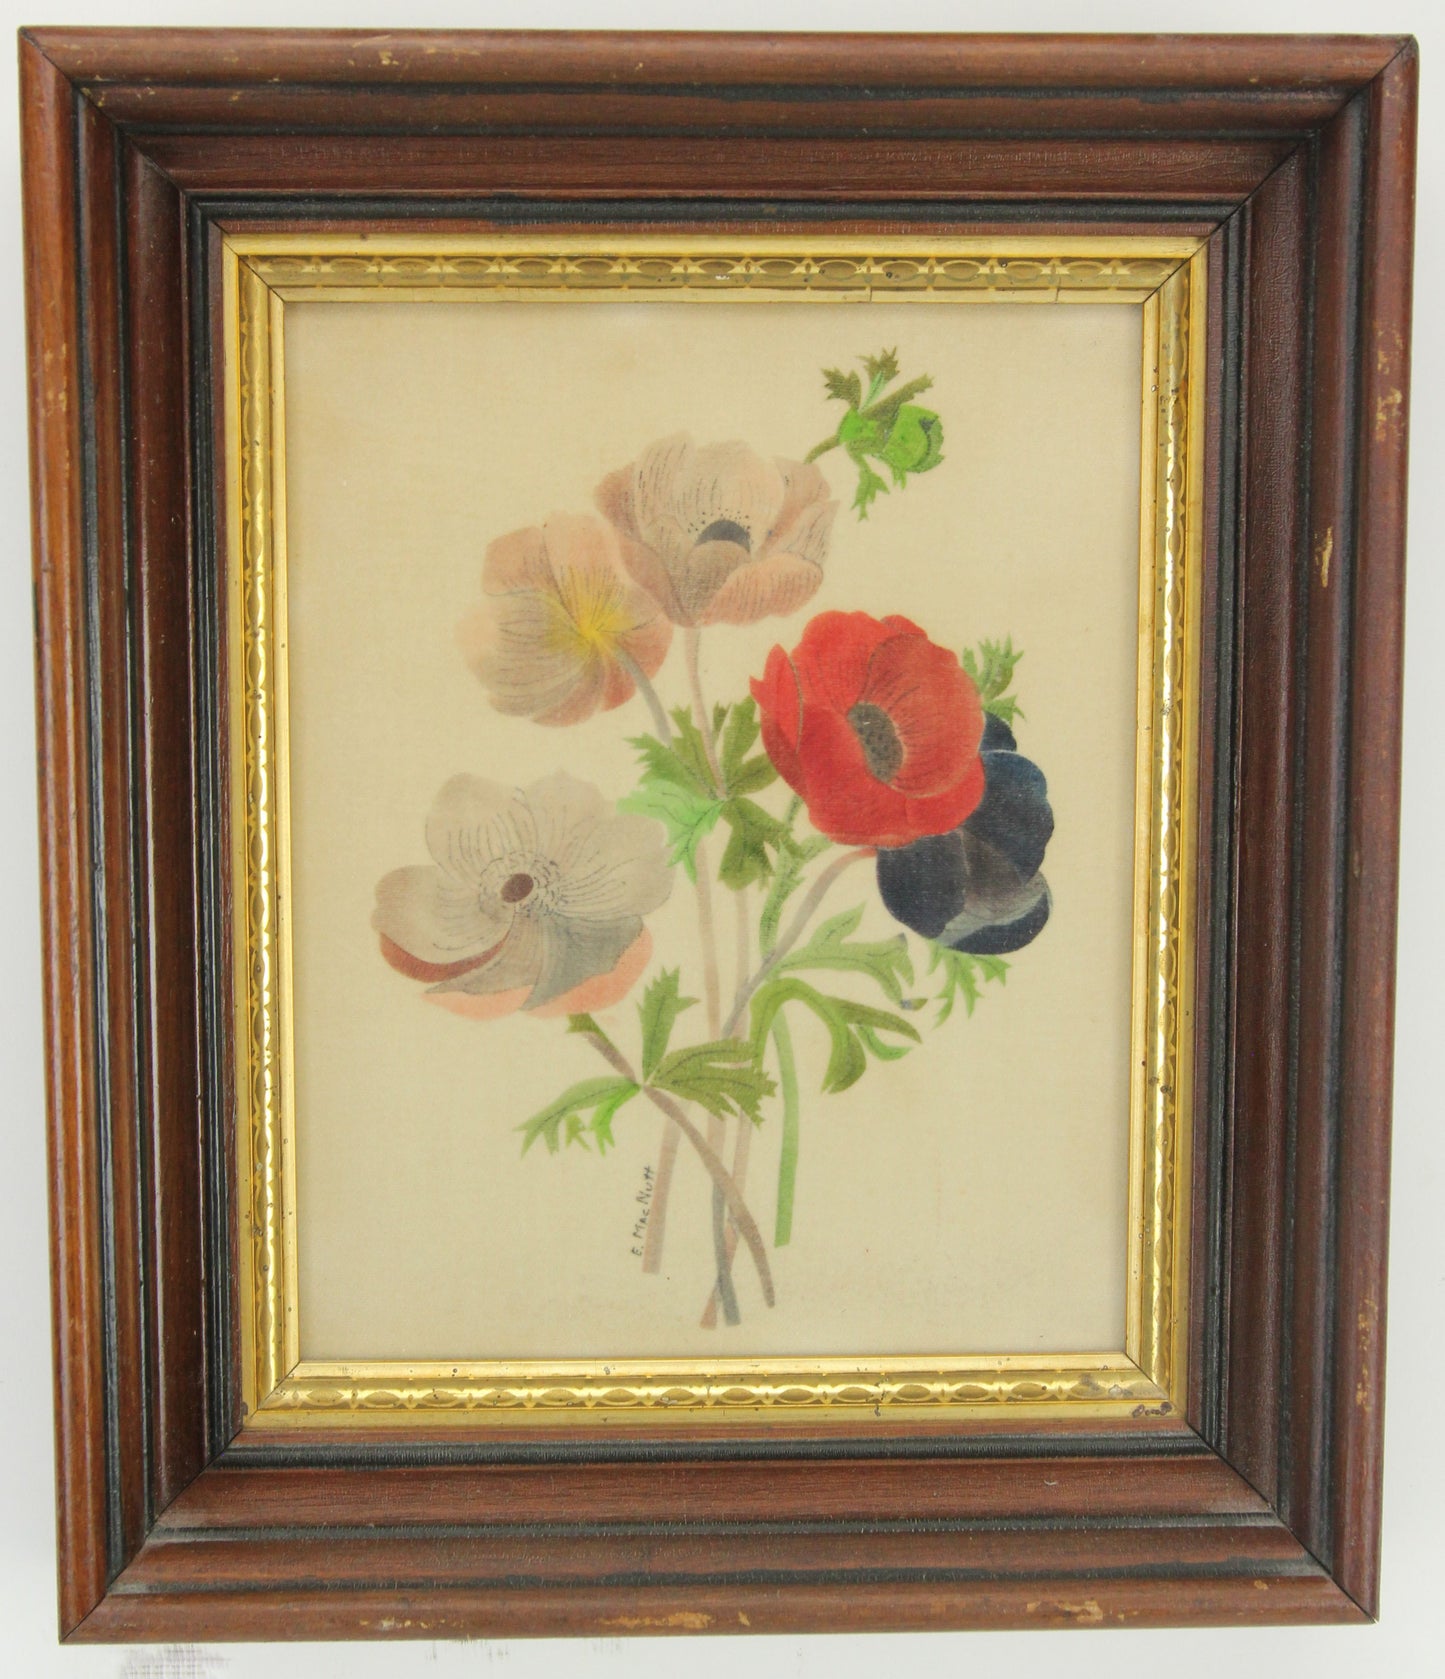 Vintage Framed Fabric Painting of Colorful Flowers, Signed E. MacNutt - 11.5 x 14"